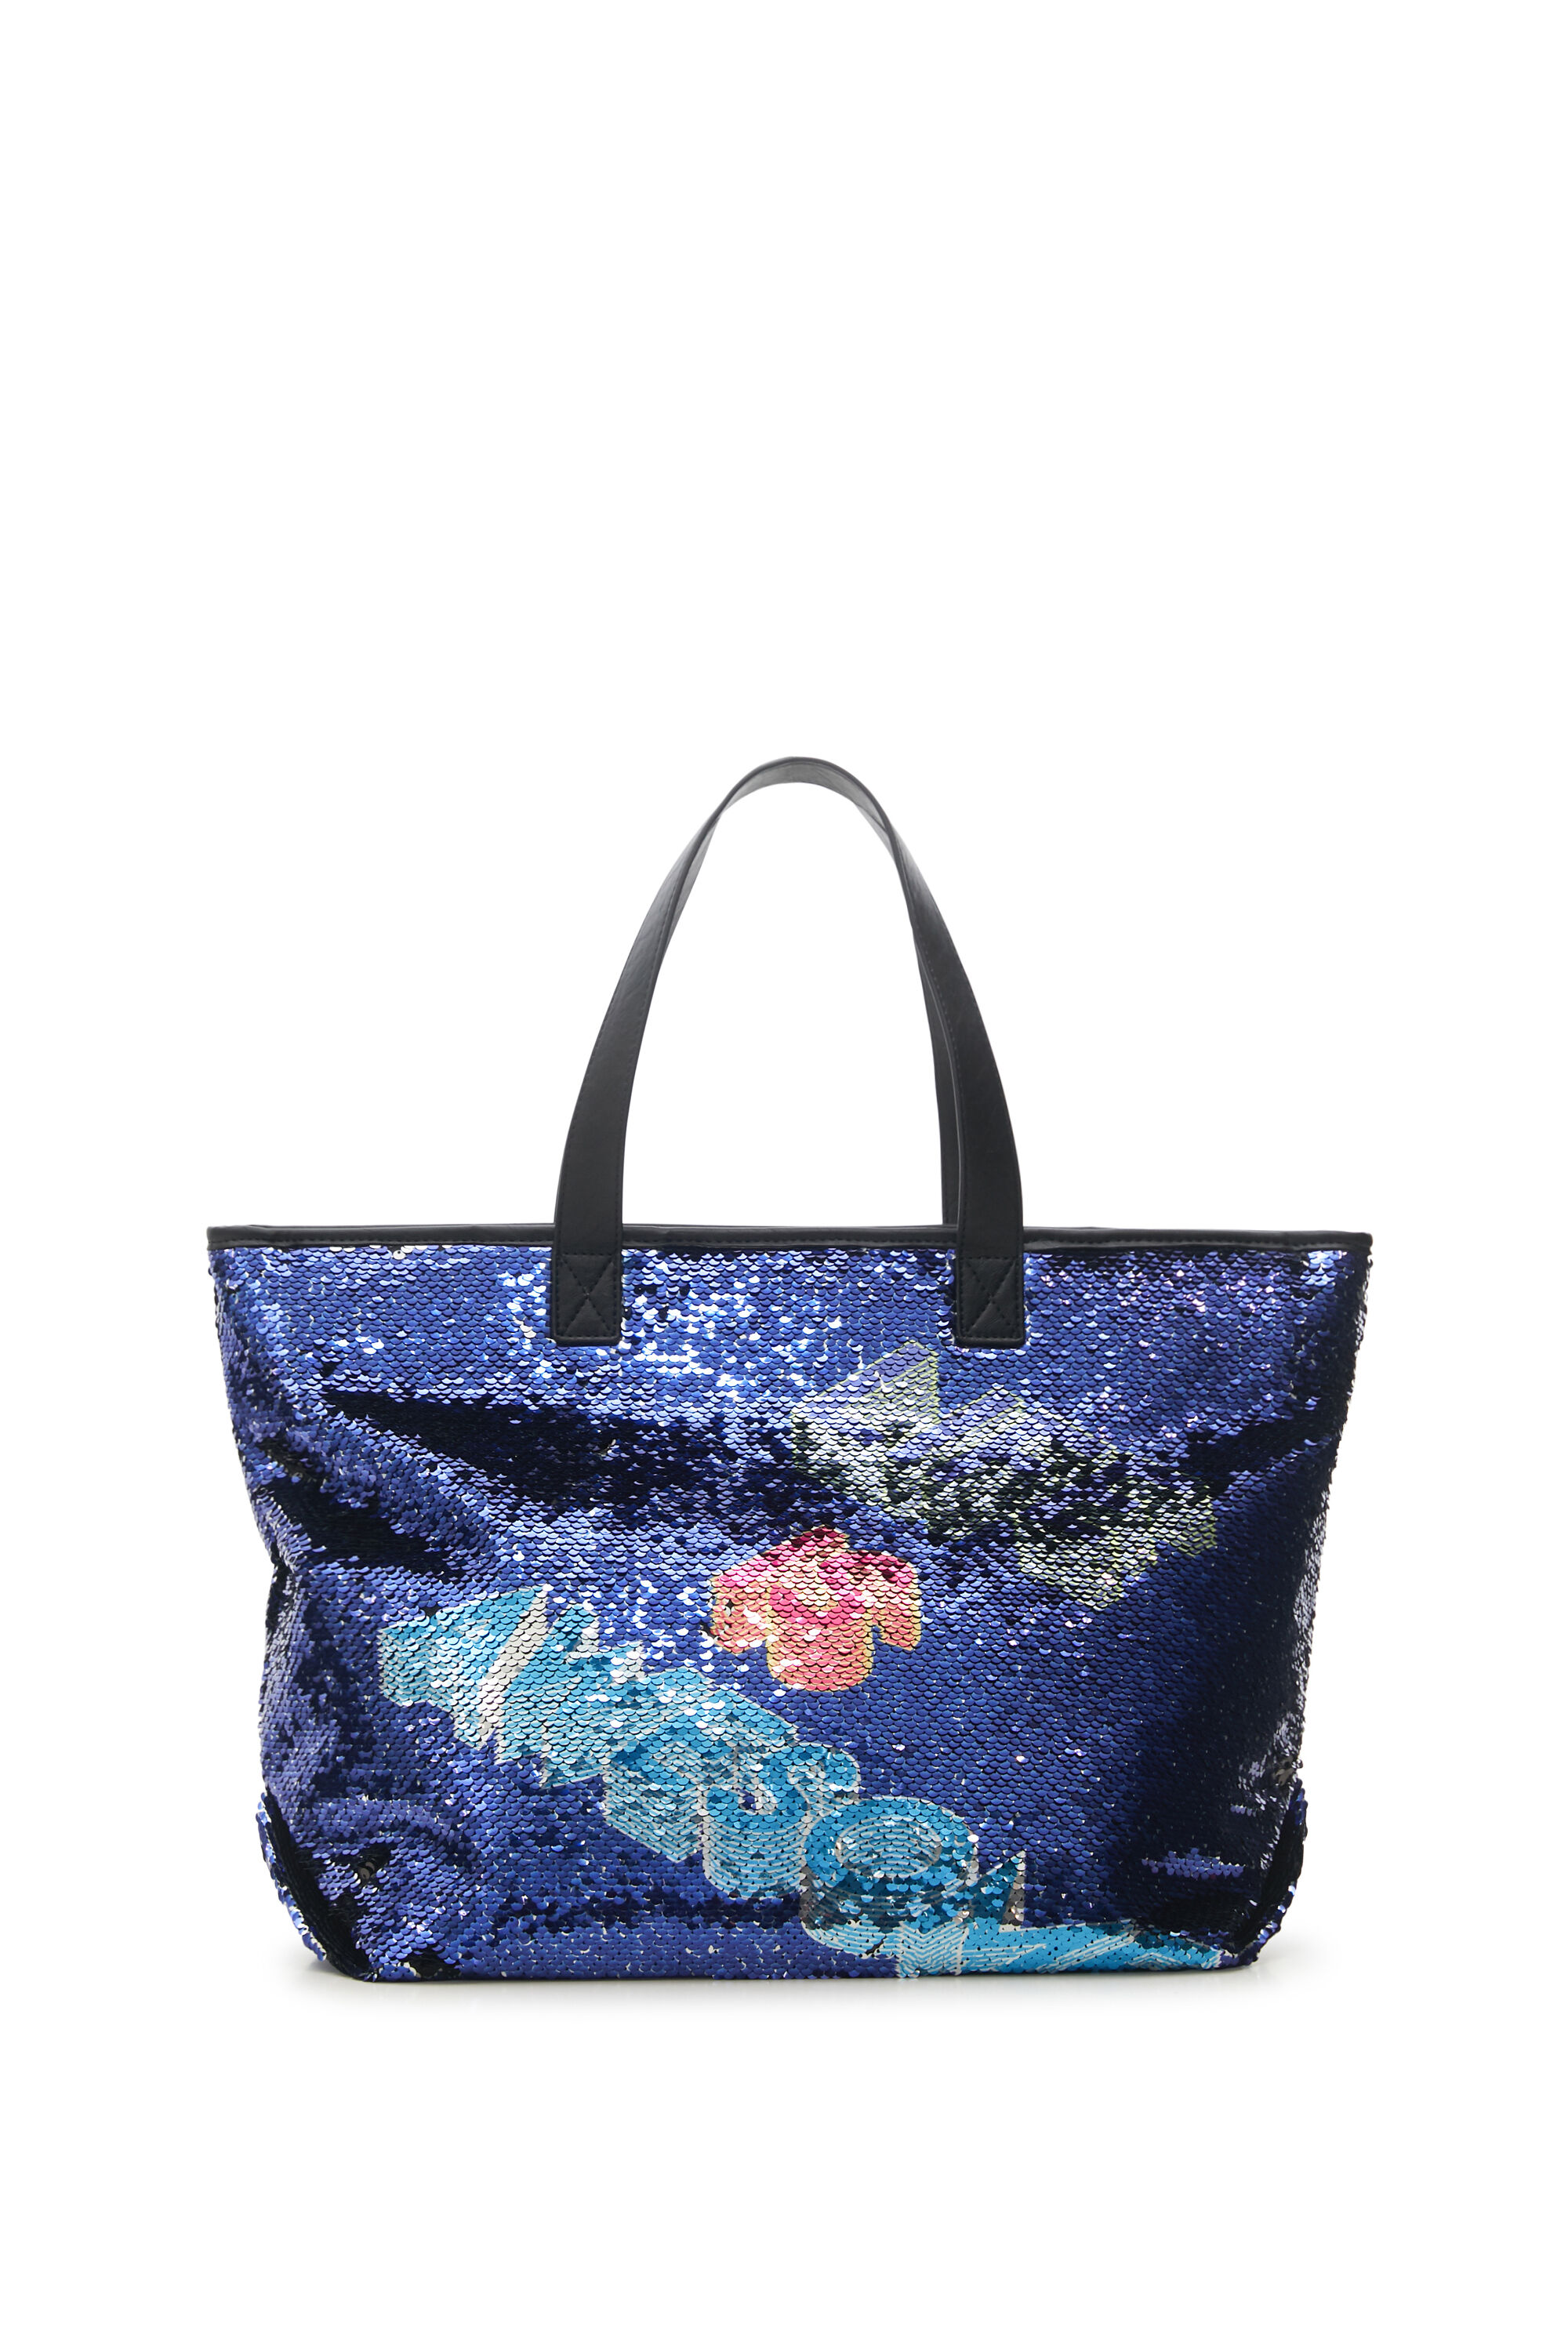 Desigual Shopping Type Bag Reversible Sequins In Blue